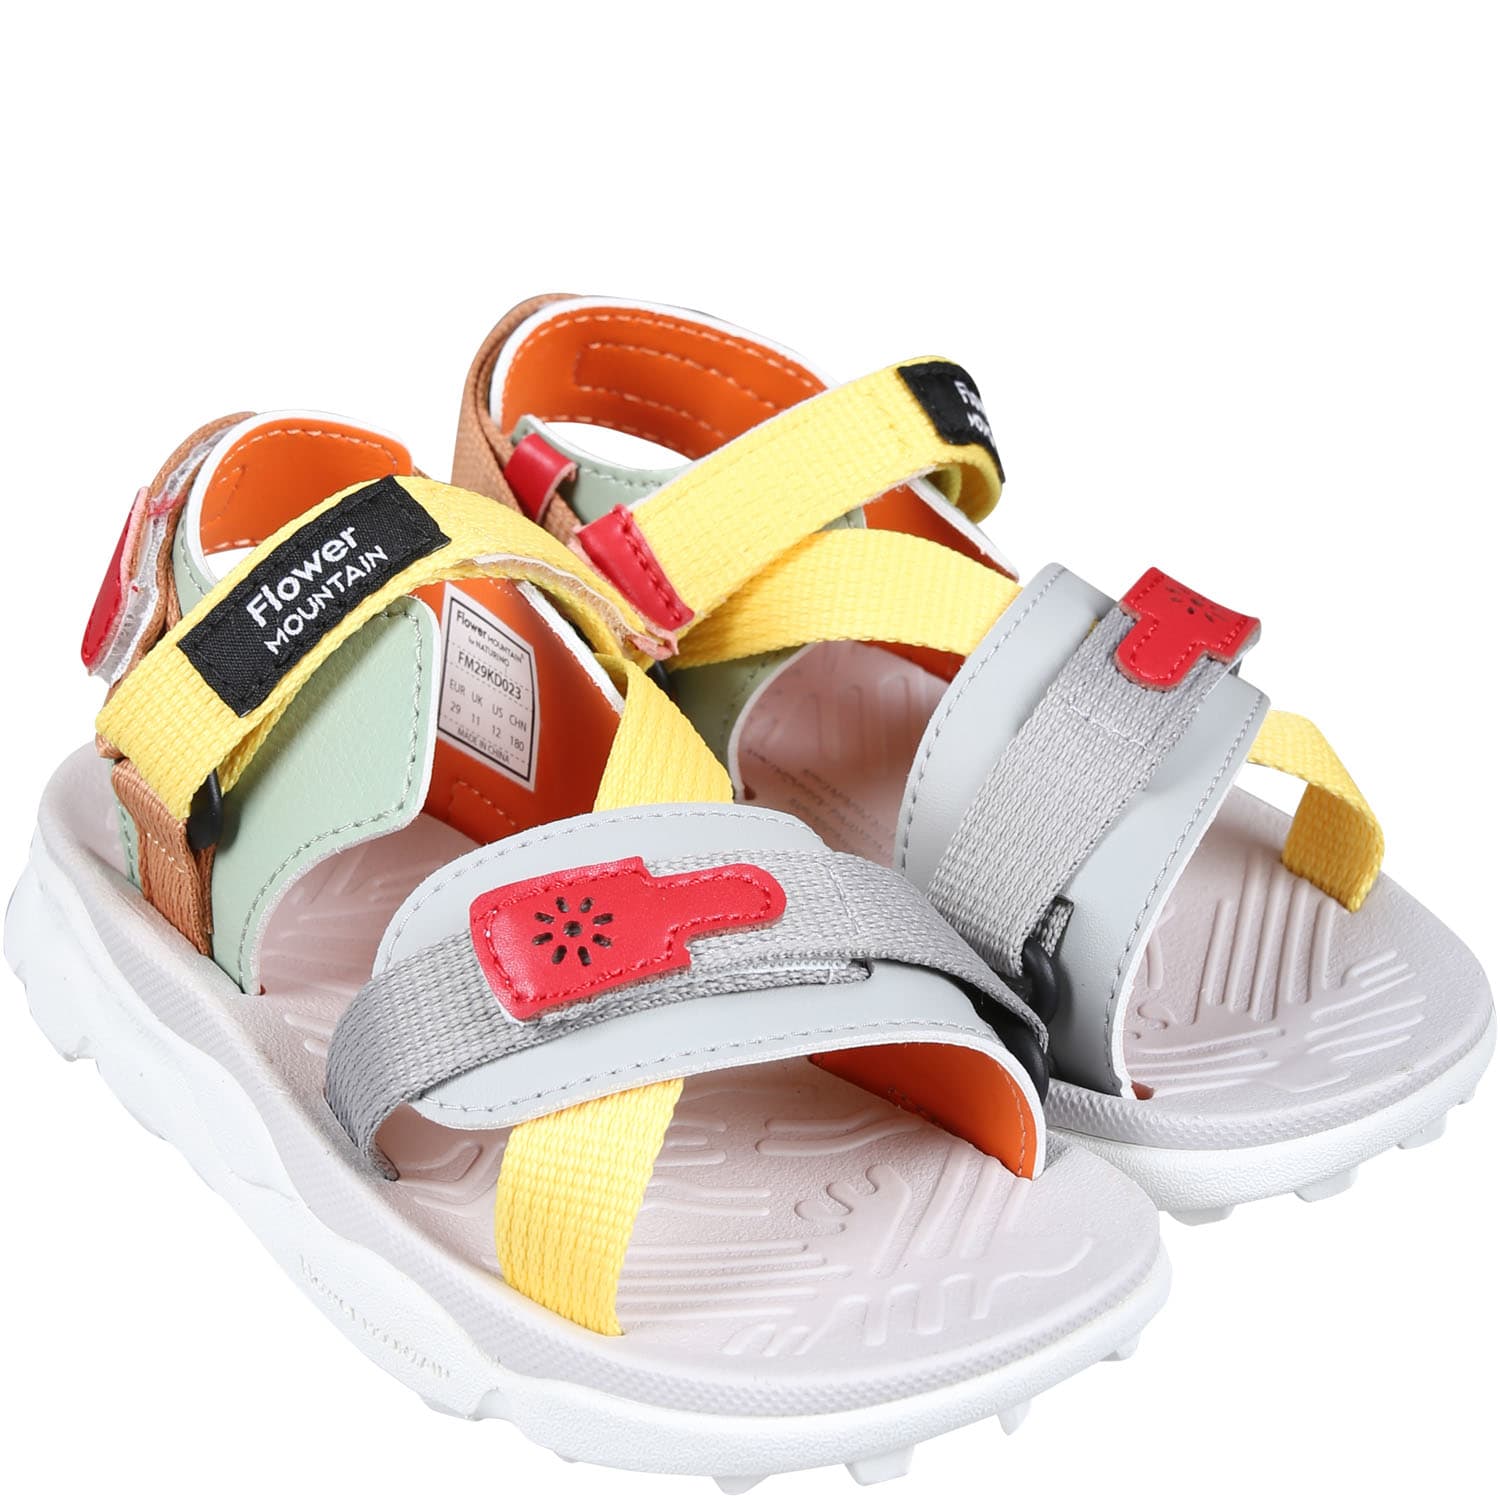 Shop Flower Mountain Multicolor Nazca Sandals For Boy With Logo